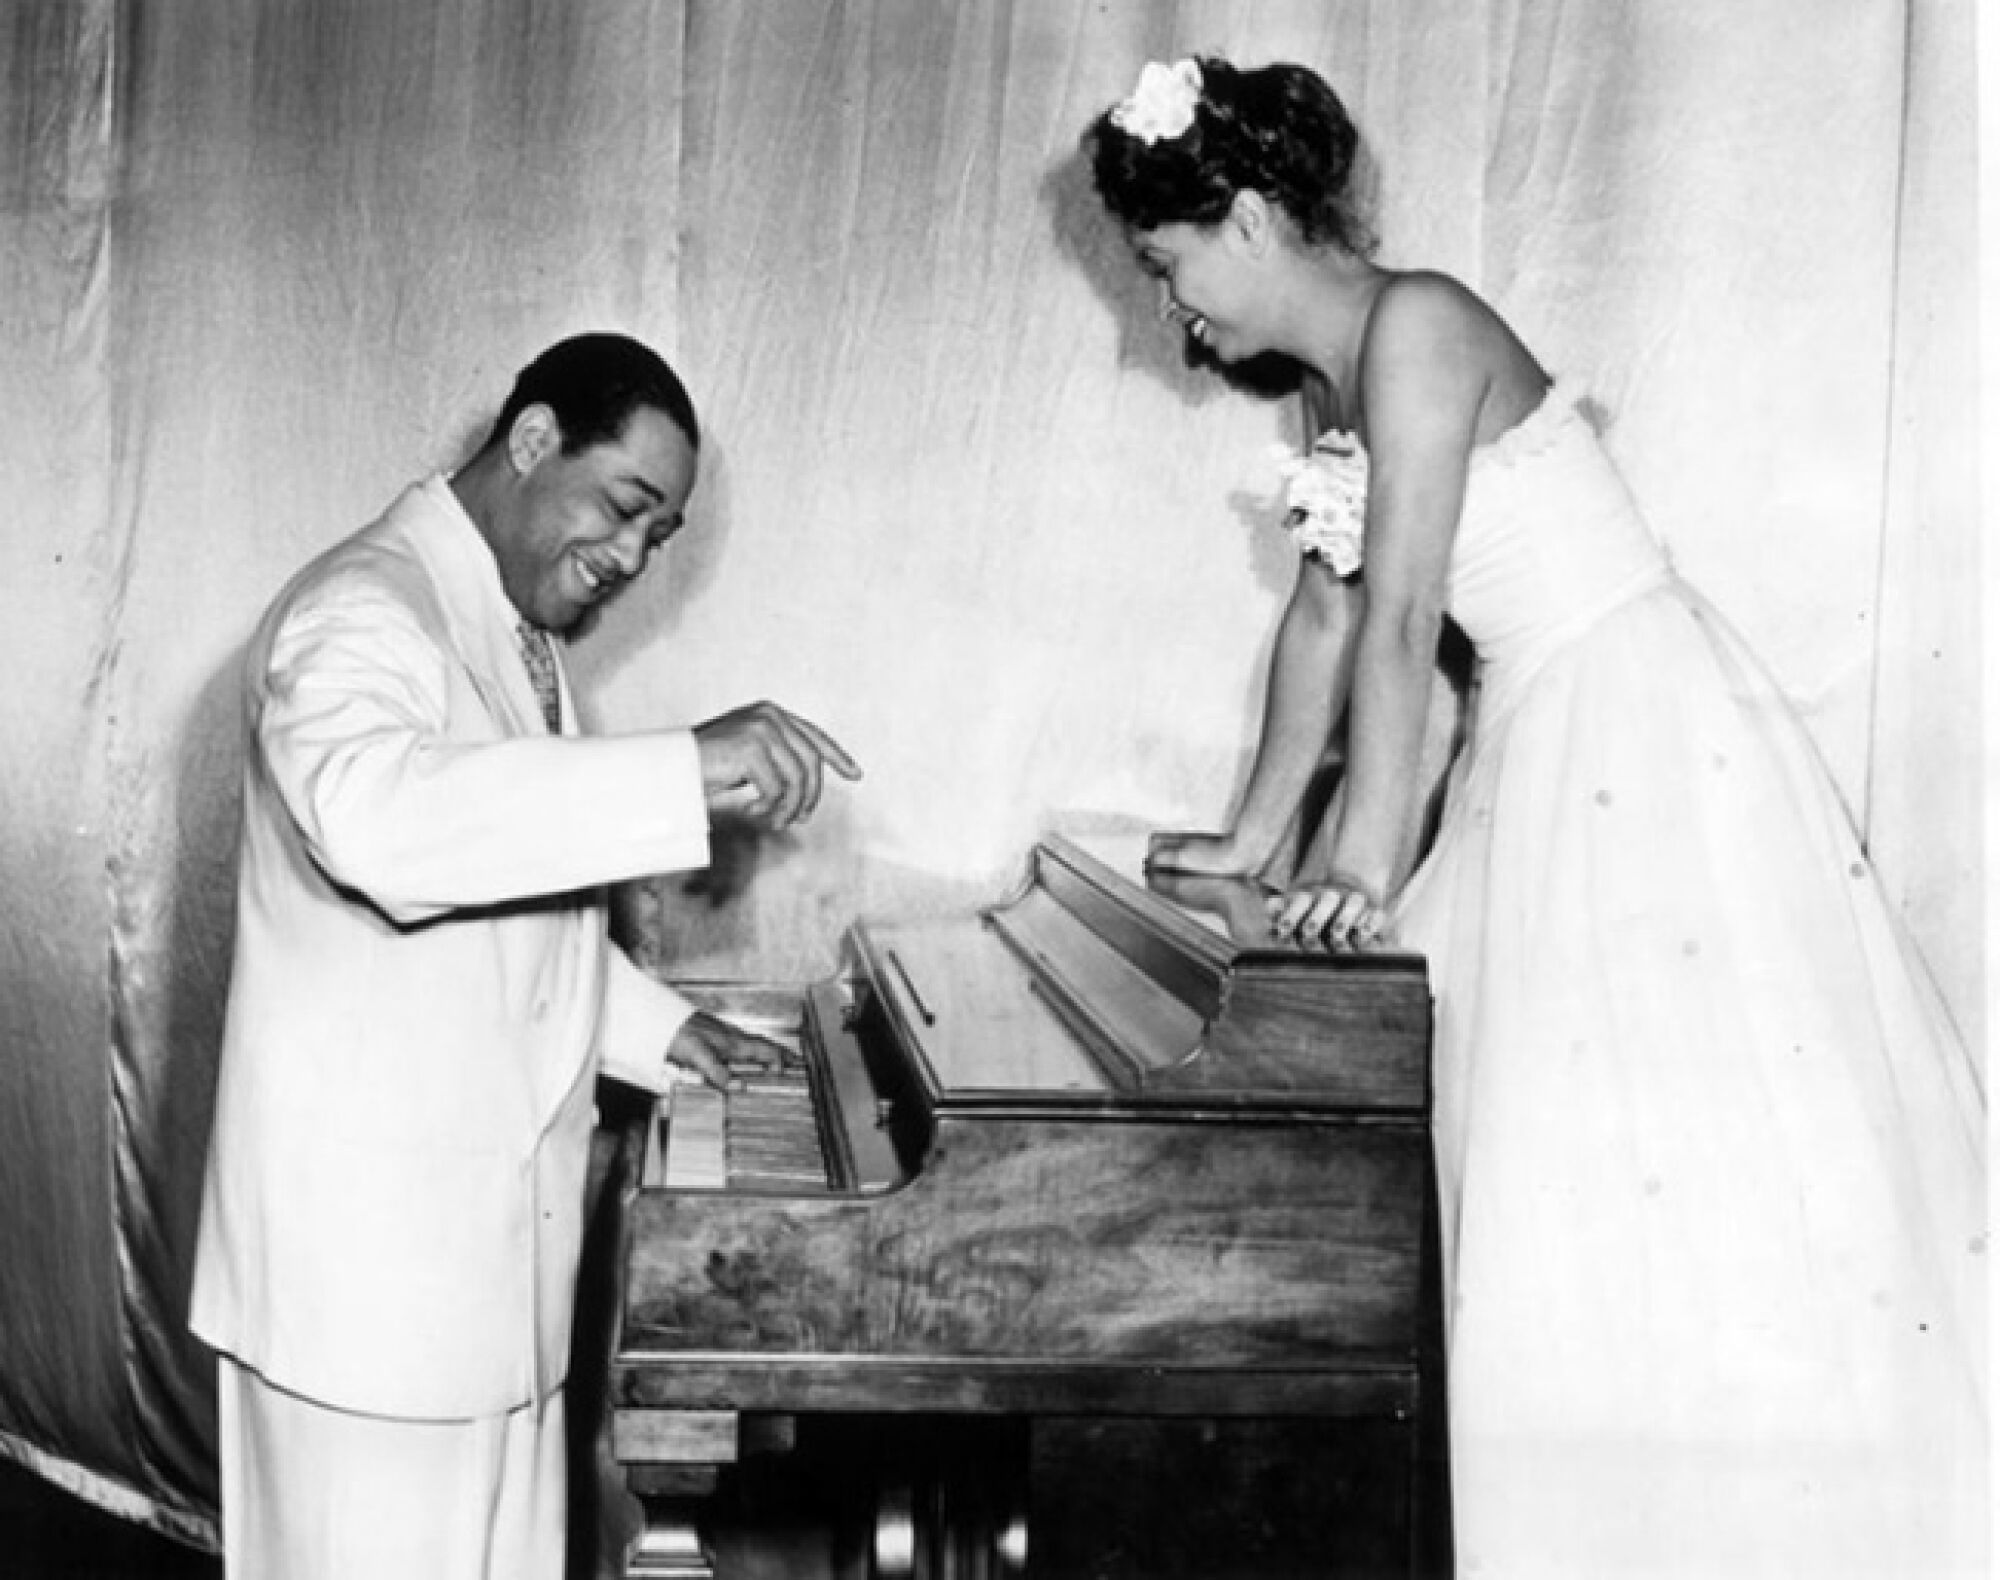 The Dunbar teemed with celebrity guests and performers like Duke Ellington.